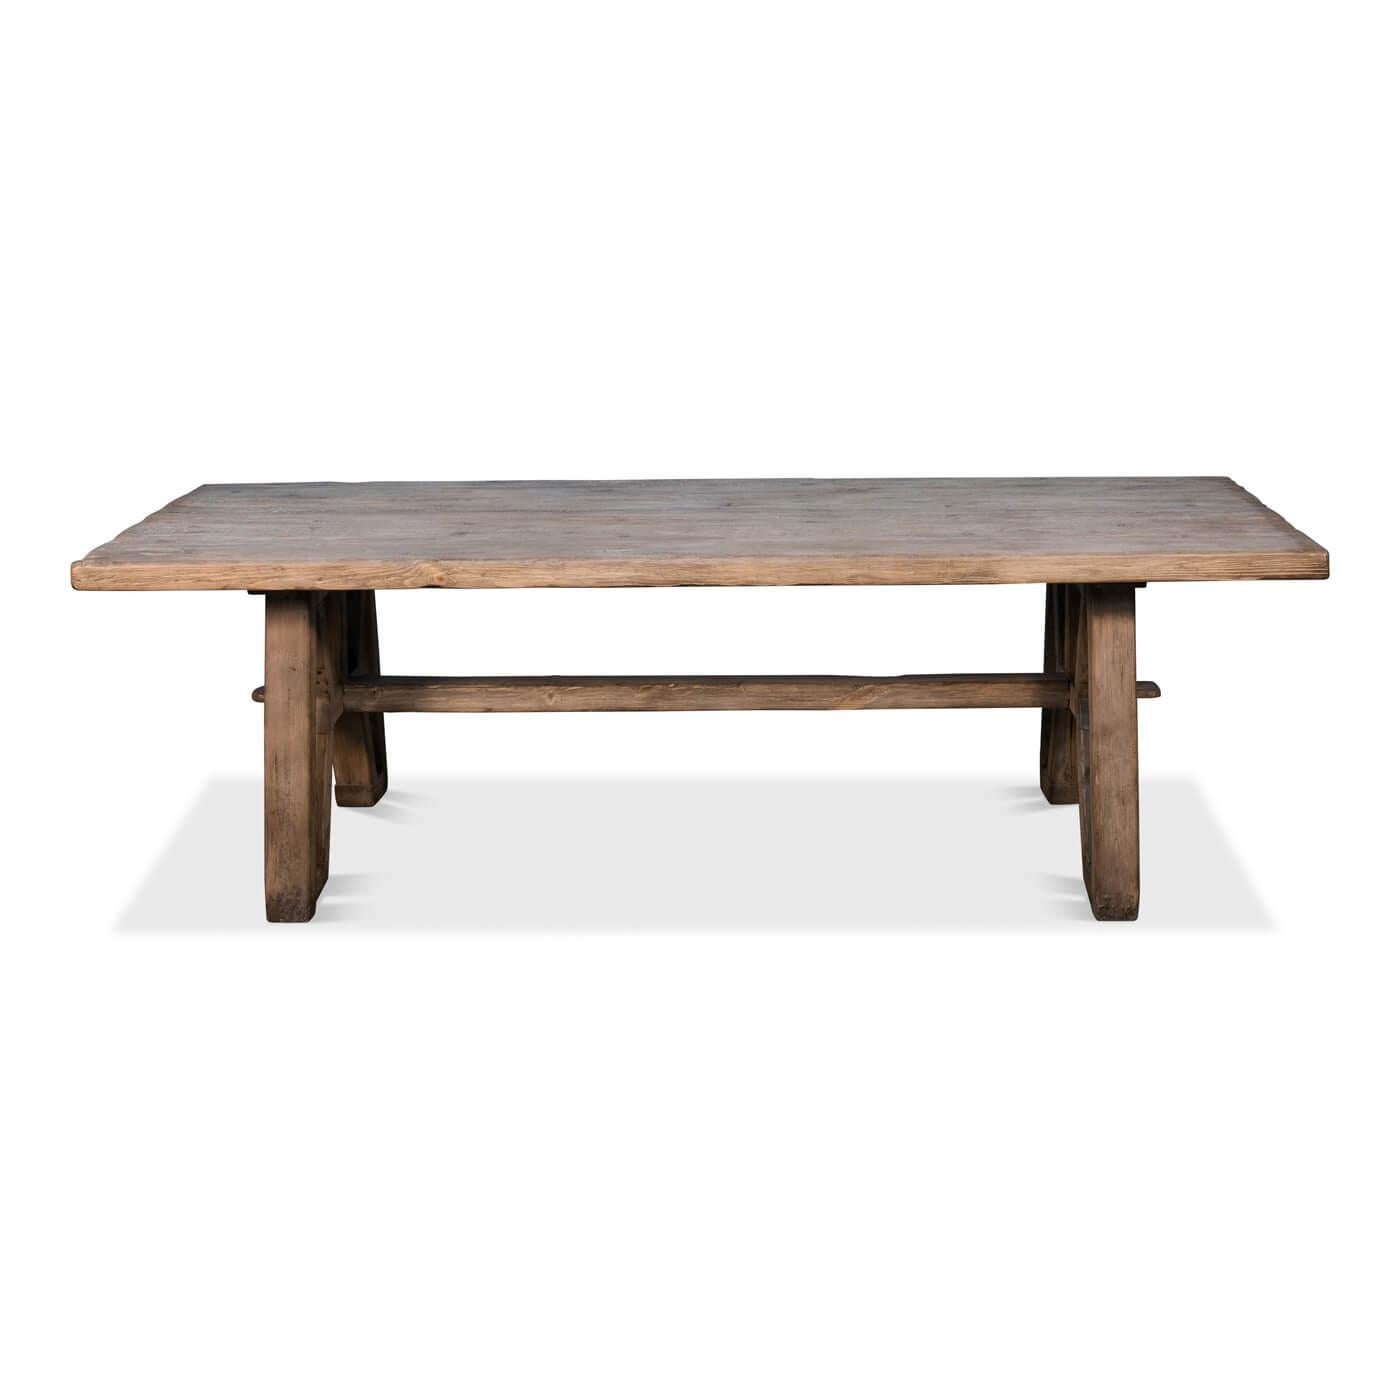 An Industrial modern style reclaimed wood farmhouse table made of old pine beams and planks and given a natural finish. 

Dimensions: 98